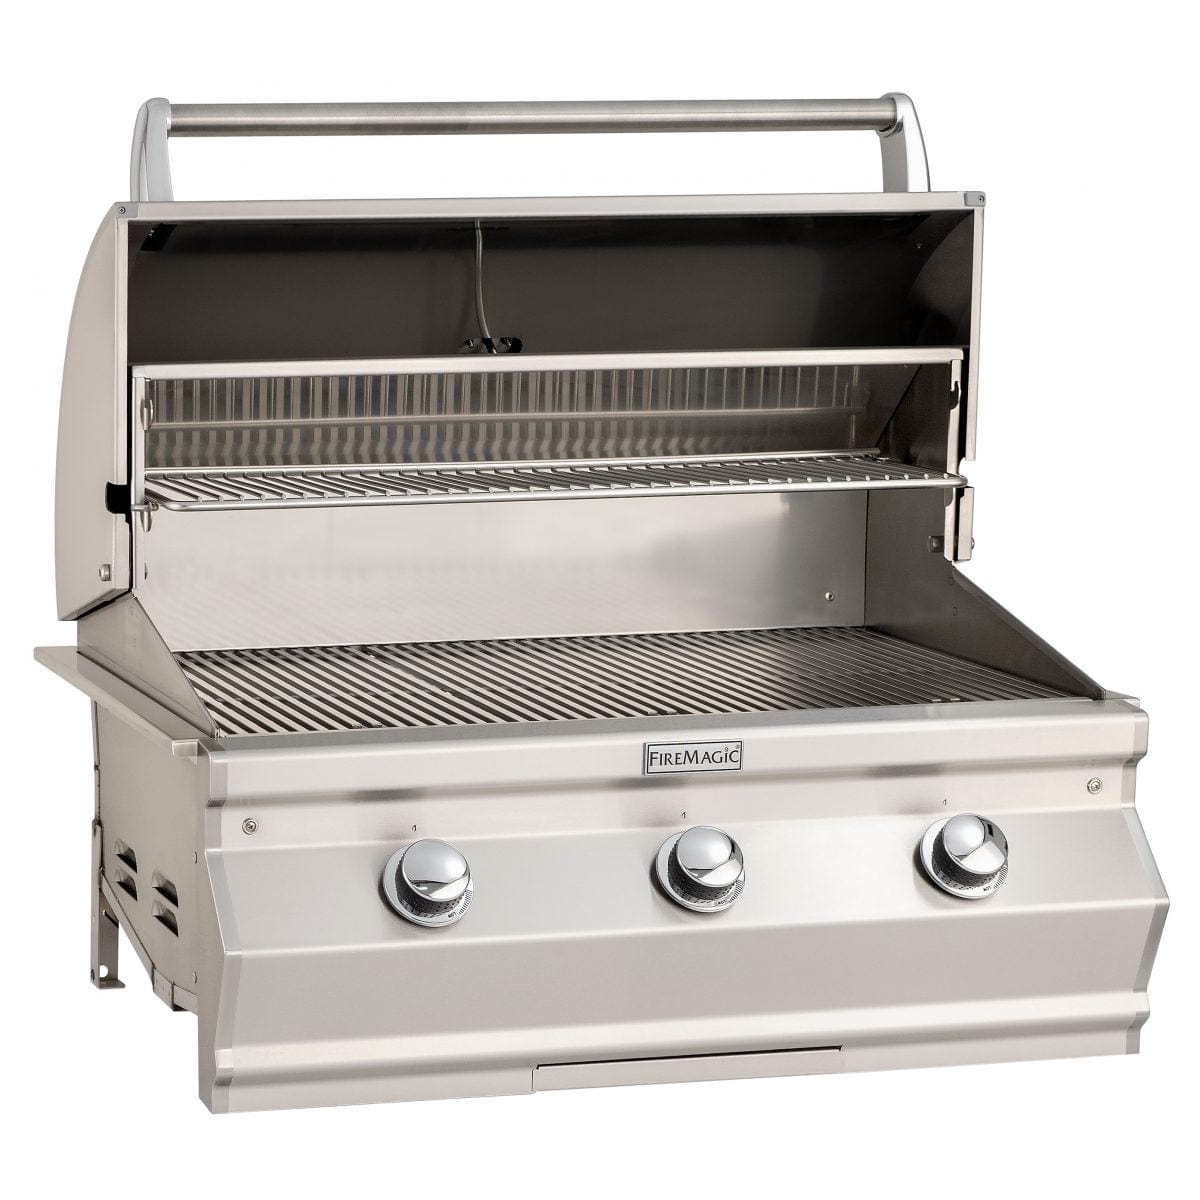 Fire Magic Choice C540i Built-In Grill - Kitchen King Direct